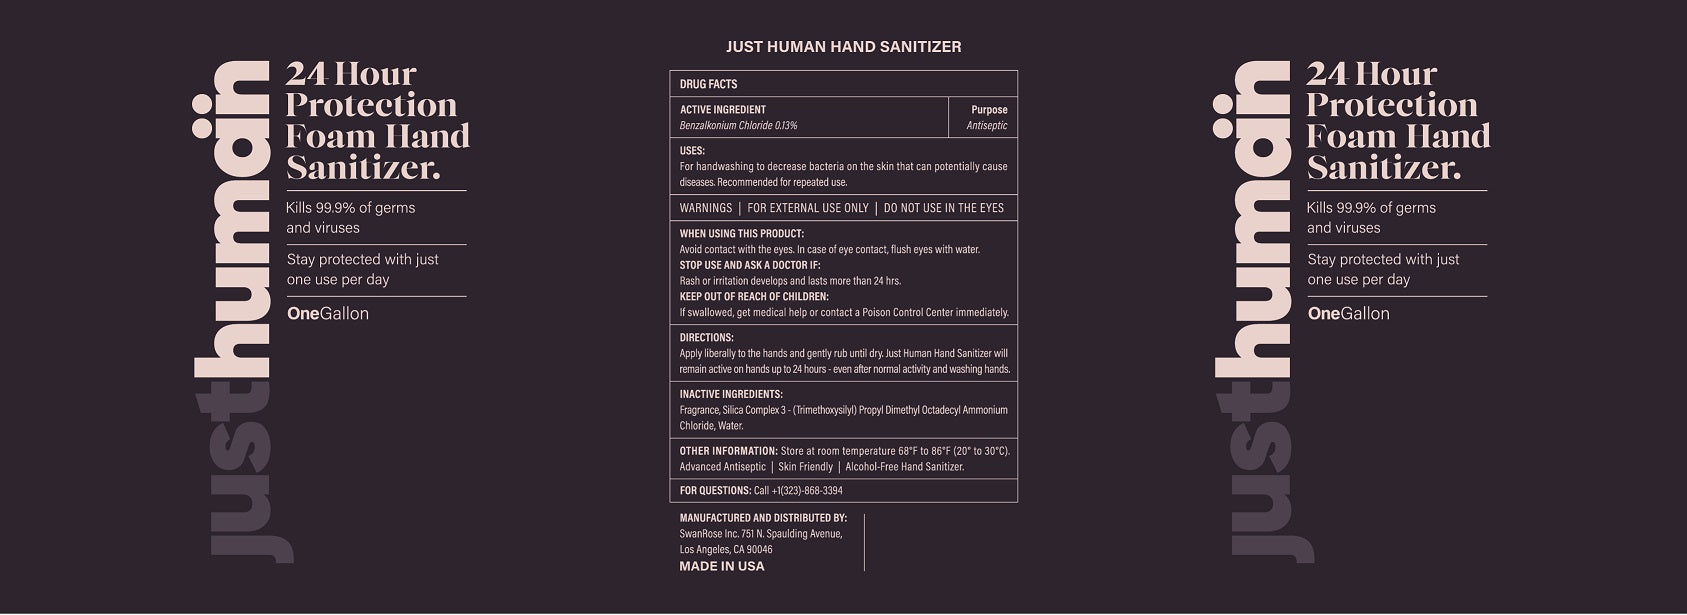 Just Human 24 Hour Protection Foam Hand Sanitizer - 8oz -24-hour hand sanitizers are USFDA registered and made in USA